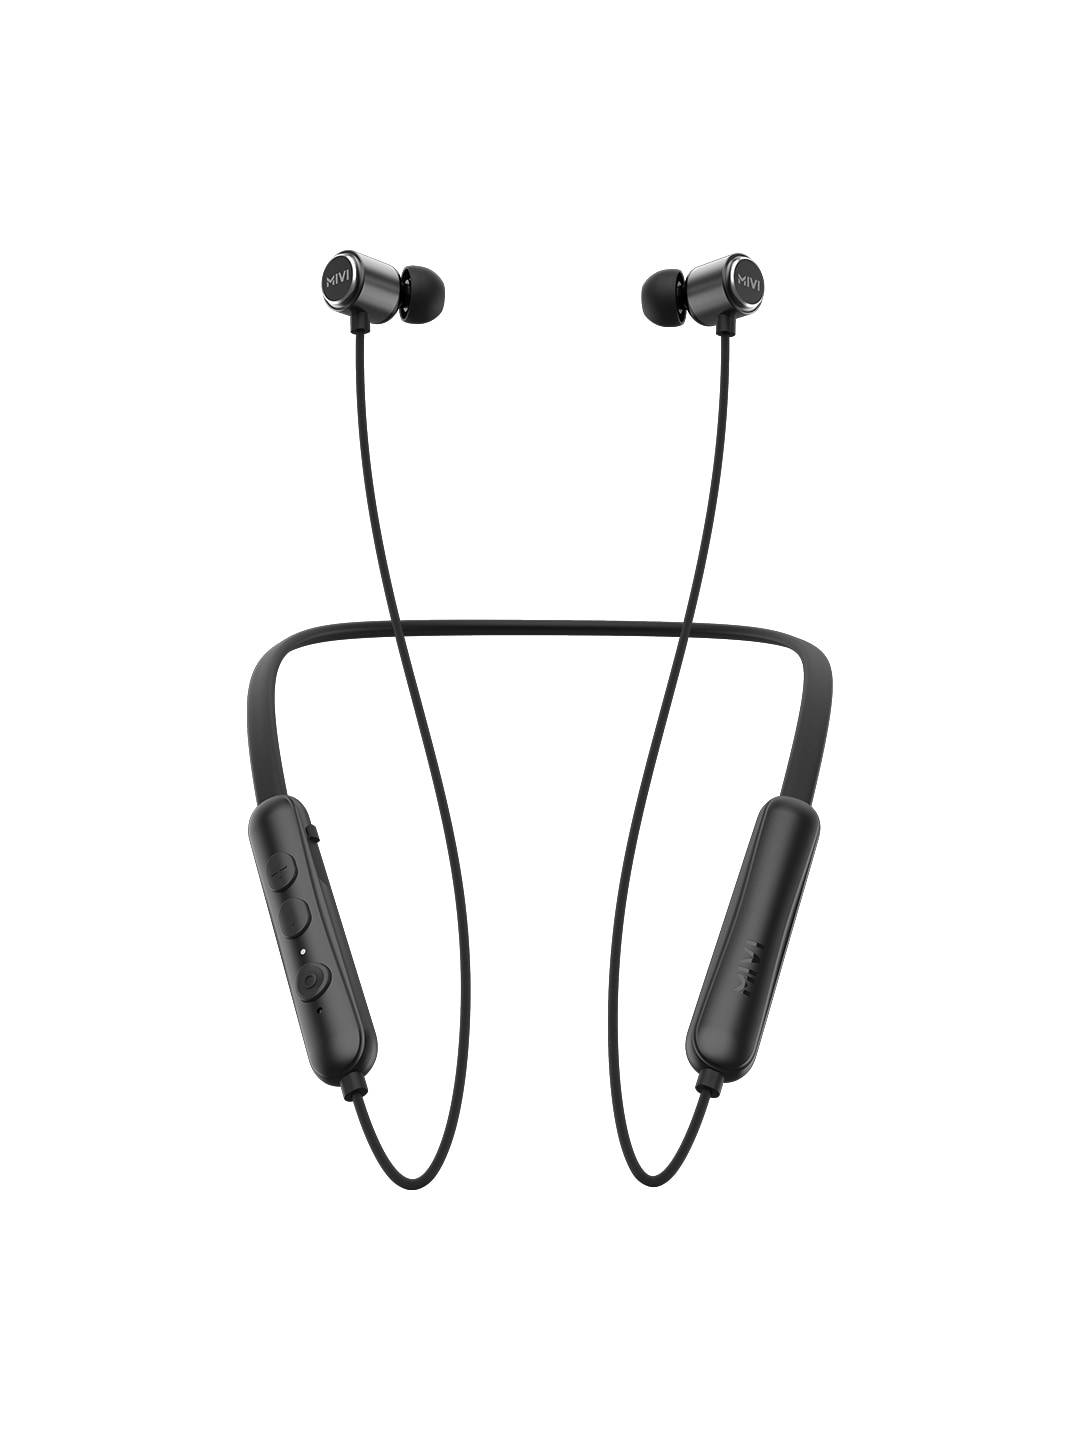 mivi Collar Flash Wireless Earphones with Mic & Fast Charging - Black Price in India